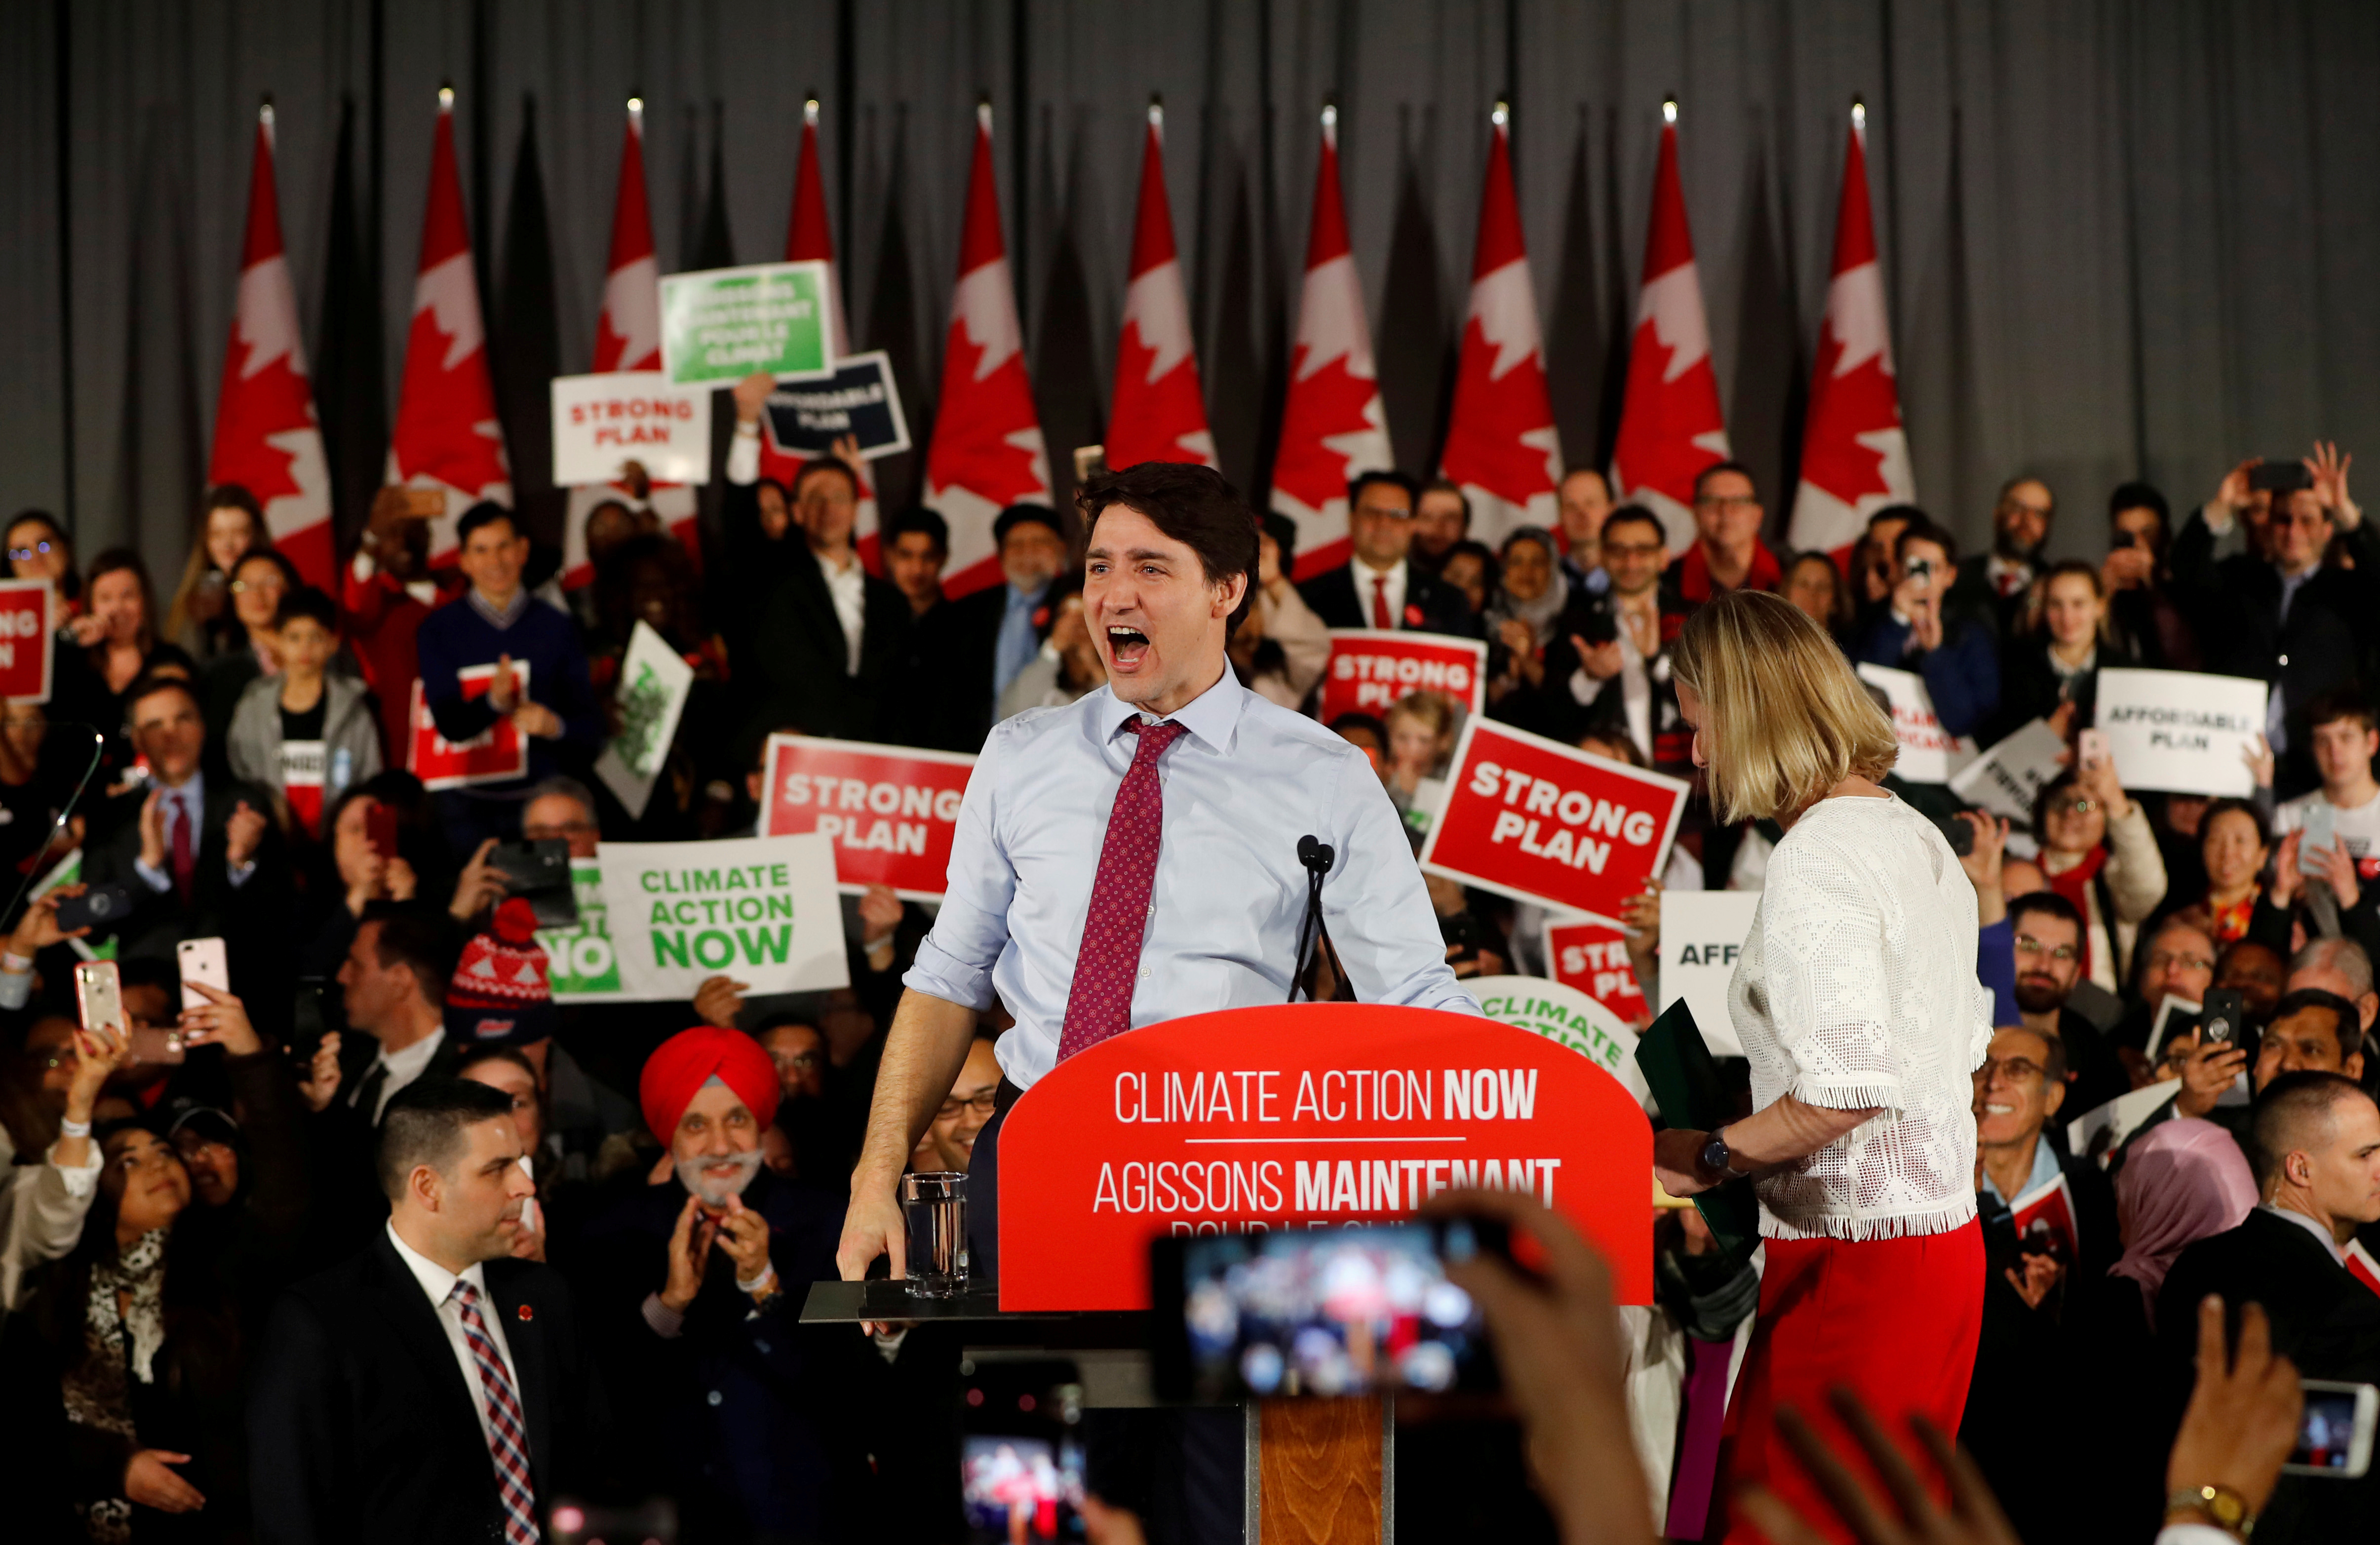 Canada's Prime Minister Justin Trudeau speaks during a Liberal Climate Action Rally in Toronto, Ontario, Canada March 4, 2019.  REUTERS/Mark Blinch